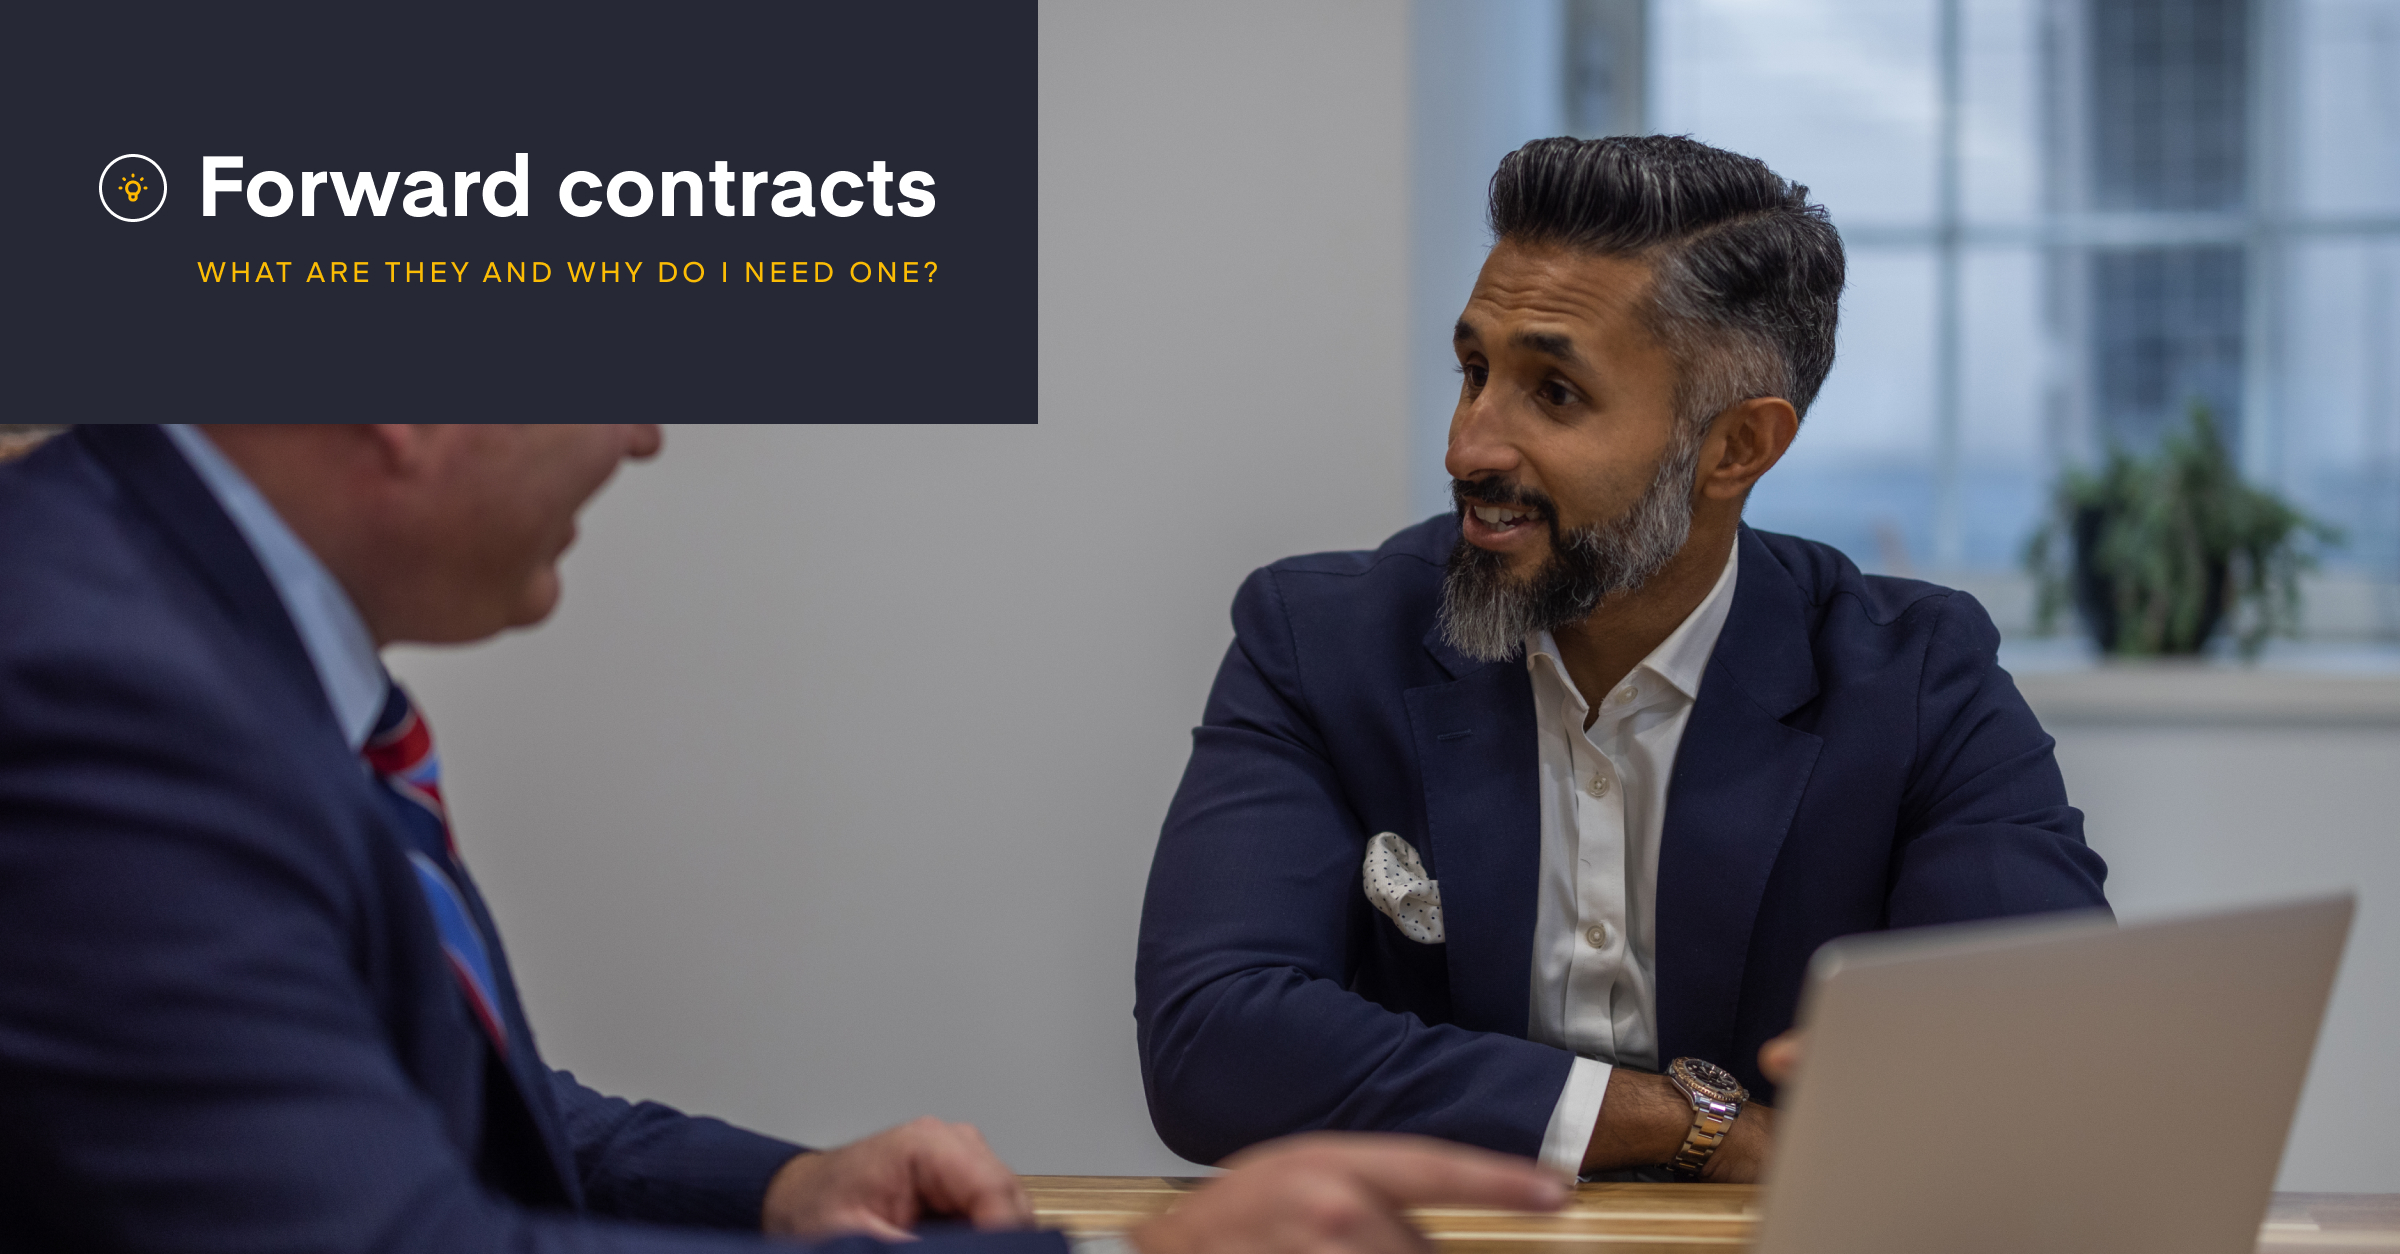 What is a forward contract and why would my business need one?